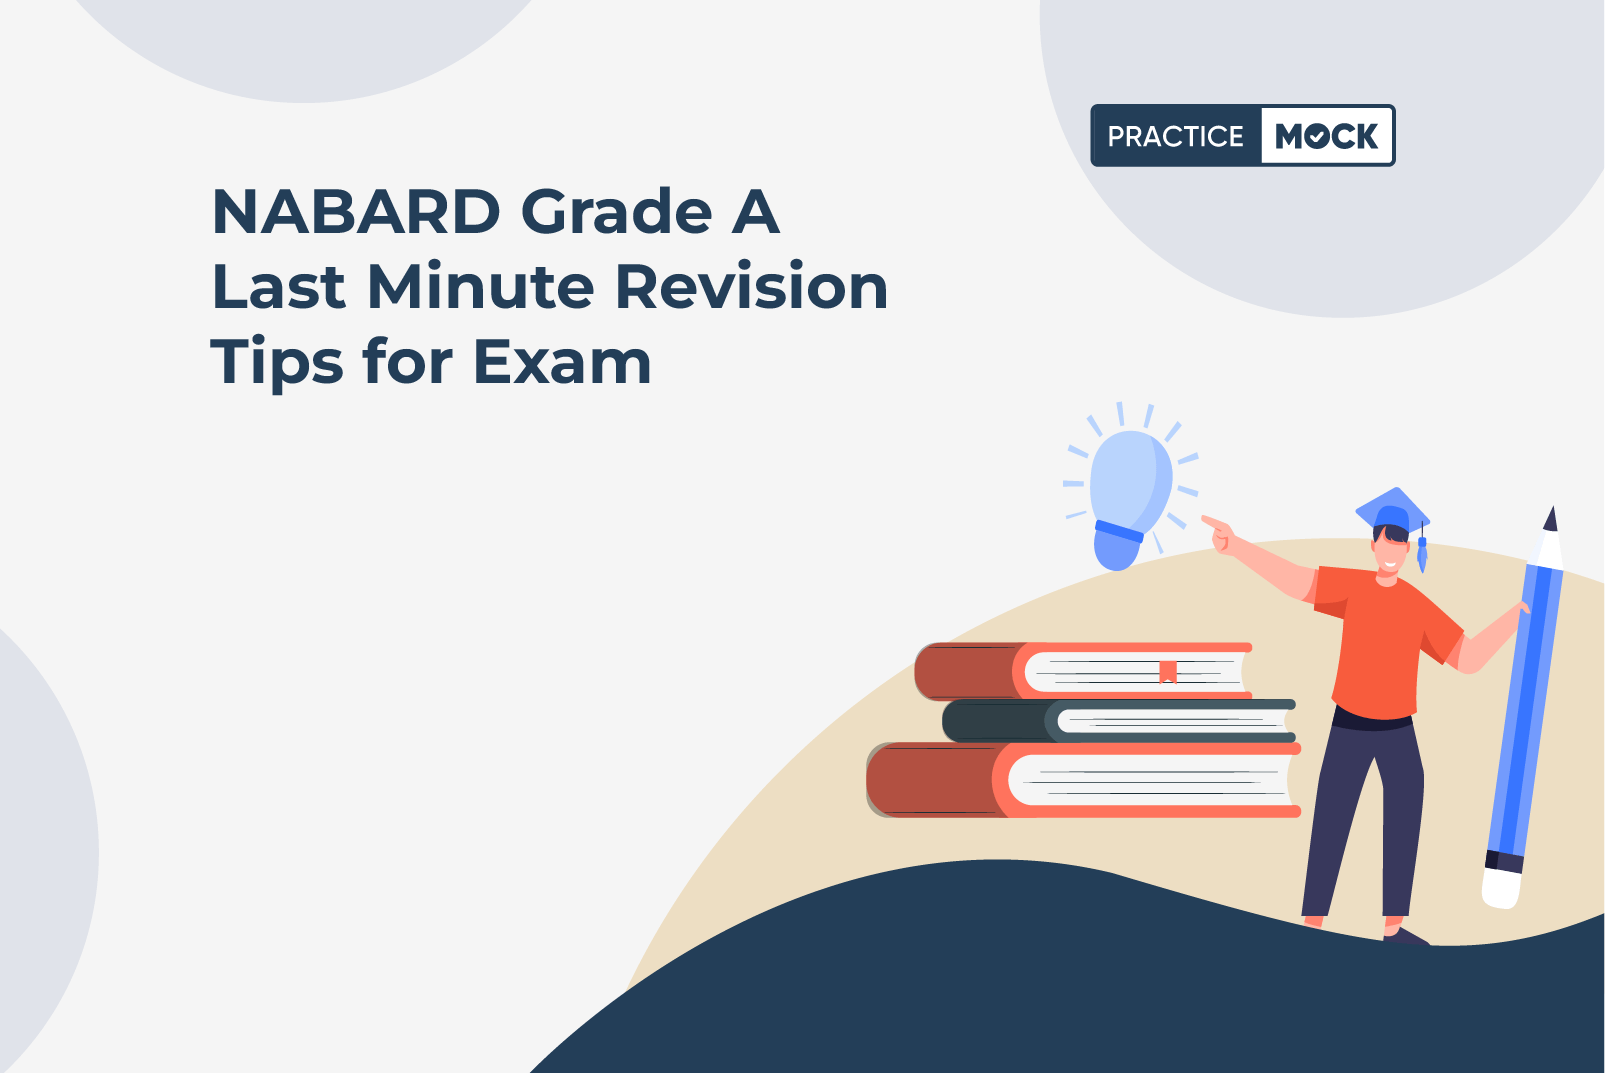 NABARD Grade A Last Minute Revision Tips for Exam